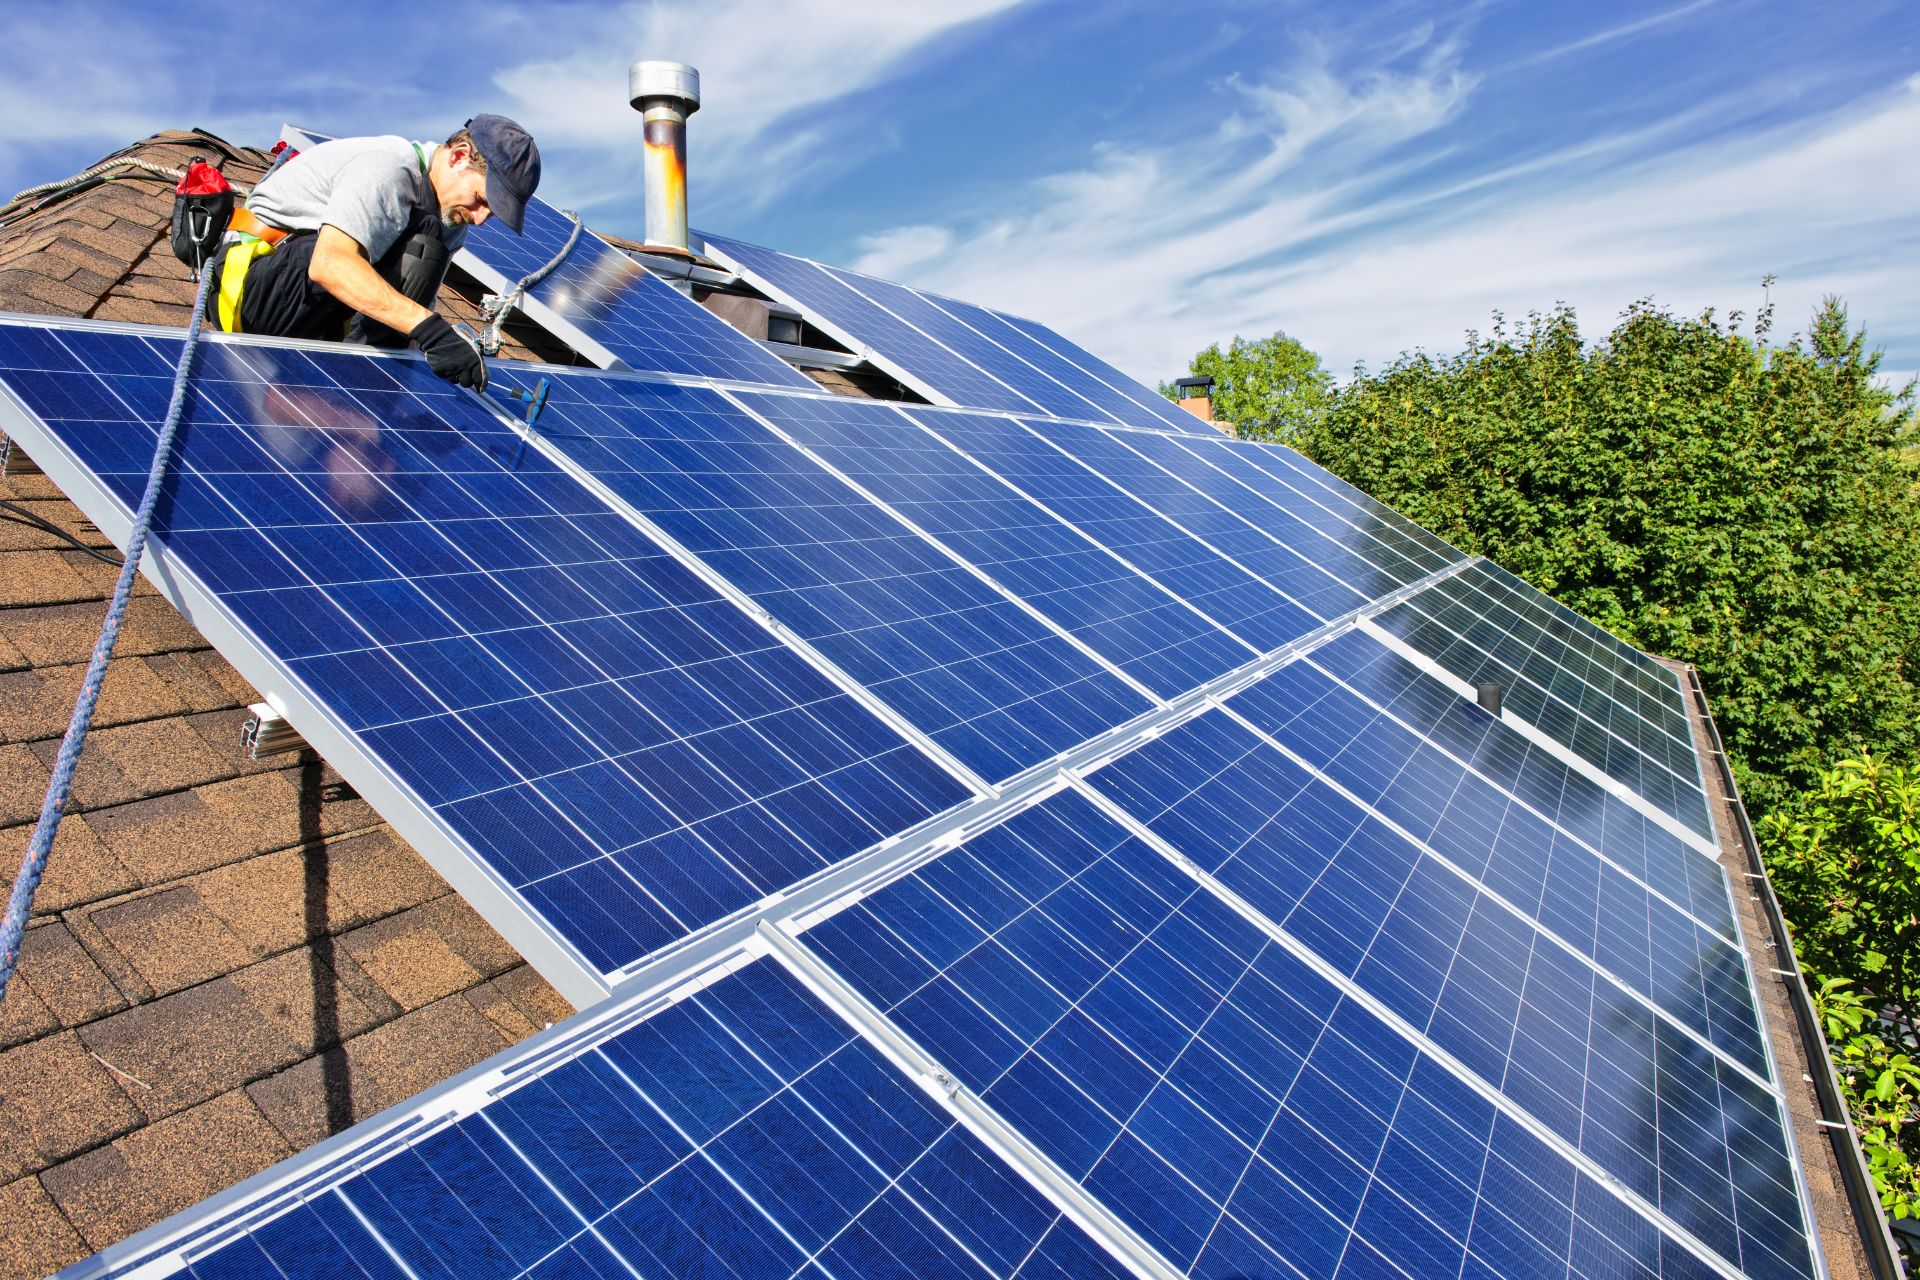 Is the Solar Company able to provide references and examples of solar installations they have completed?